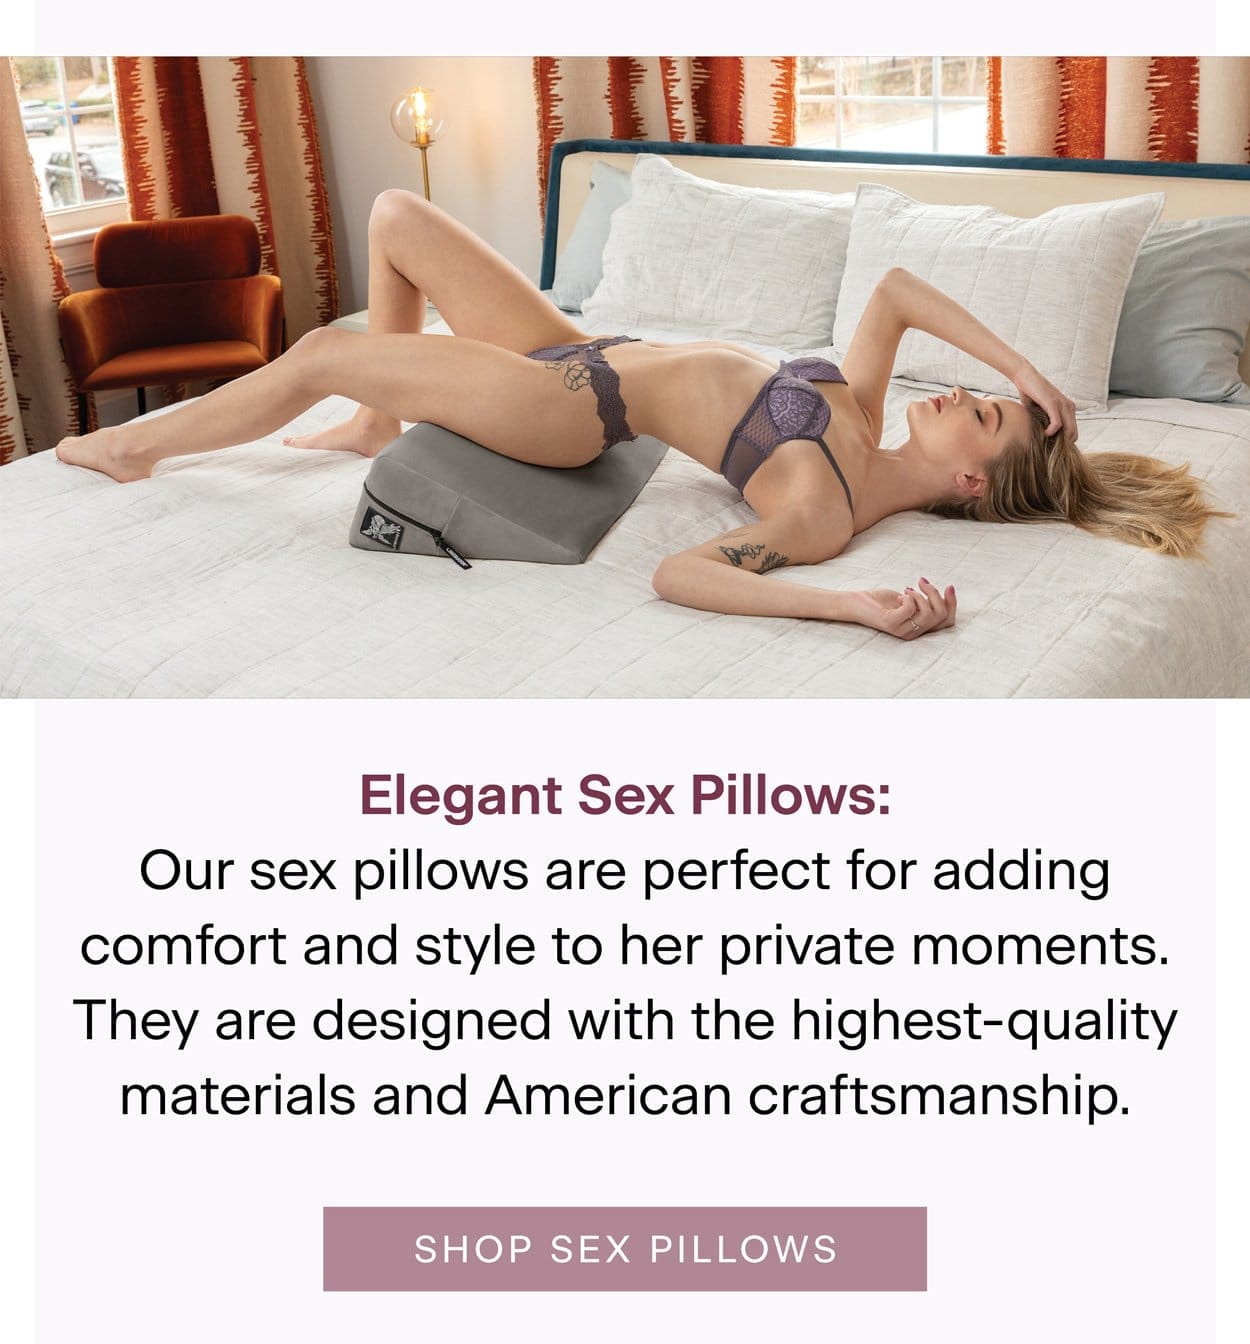 Elegant Sex Pillows: Our sex pillows are perfect for adding comfort and style to her private moments. They are designed with the highest-quality materials and American craftsmanship.